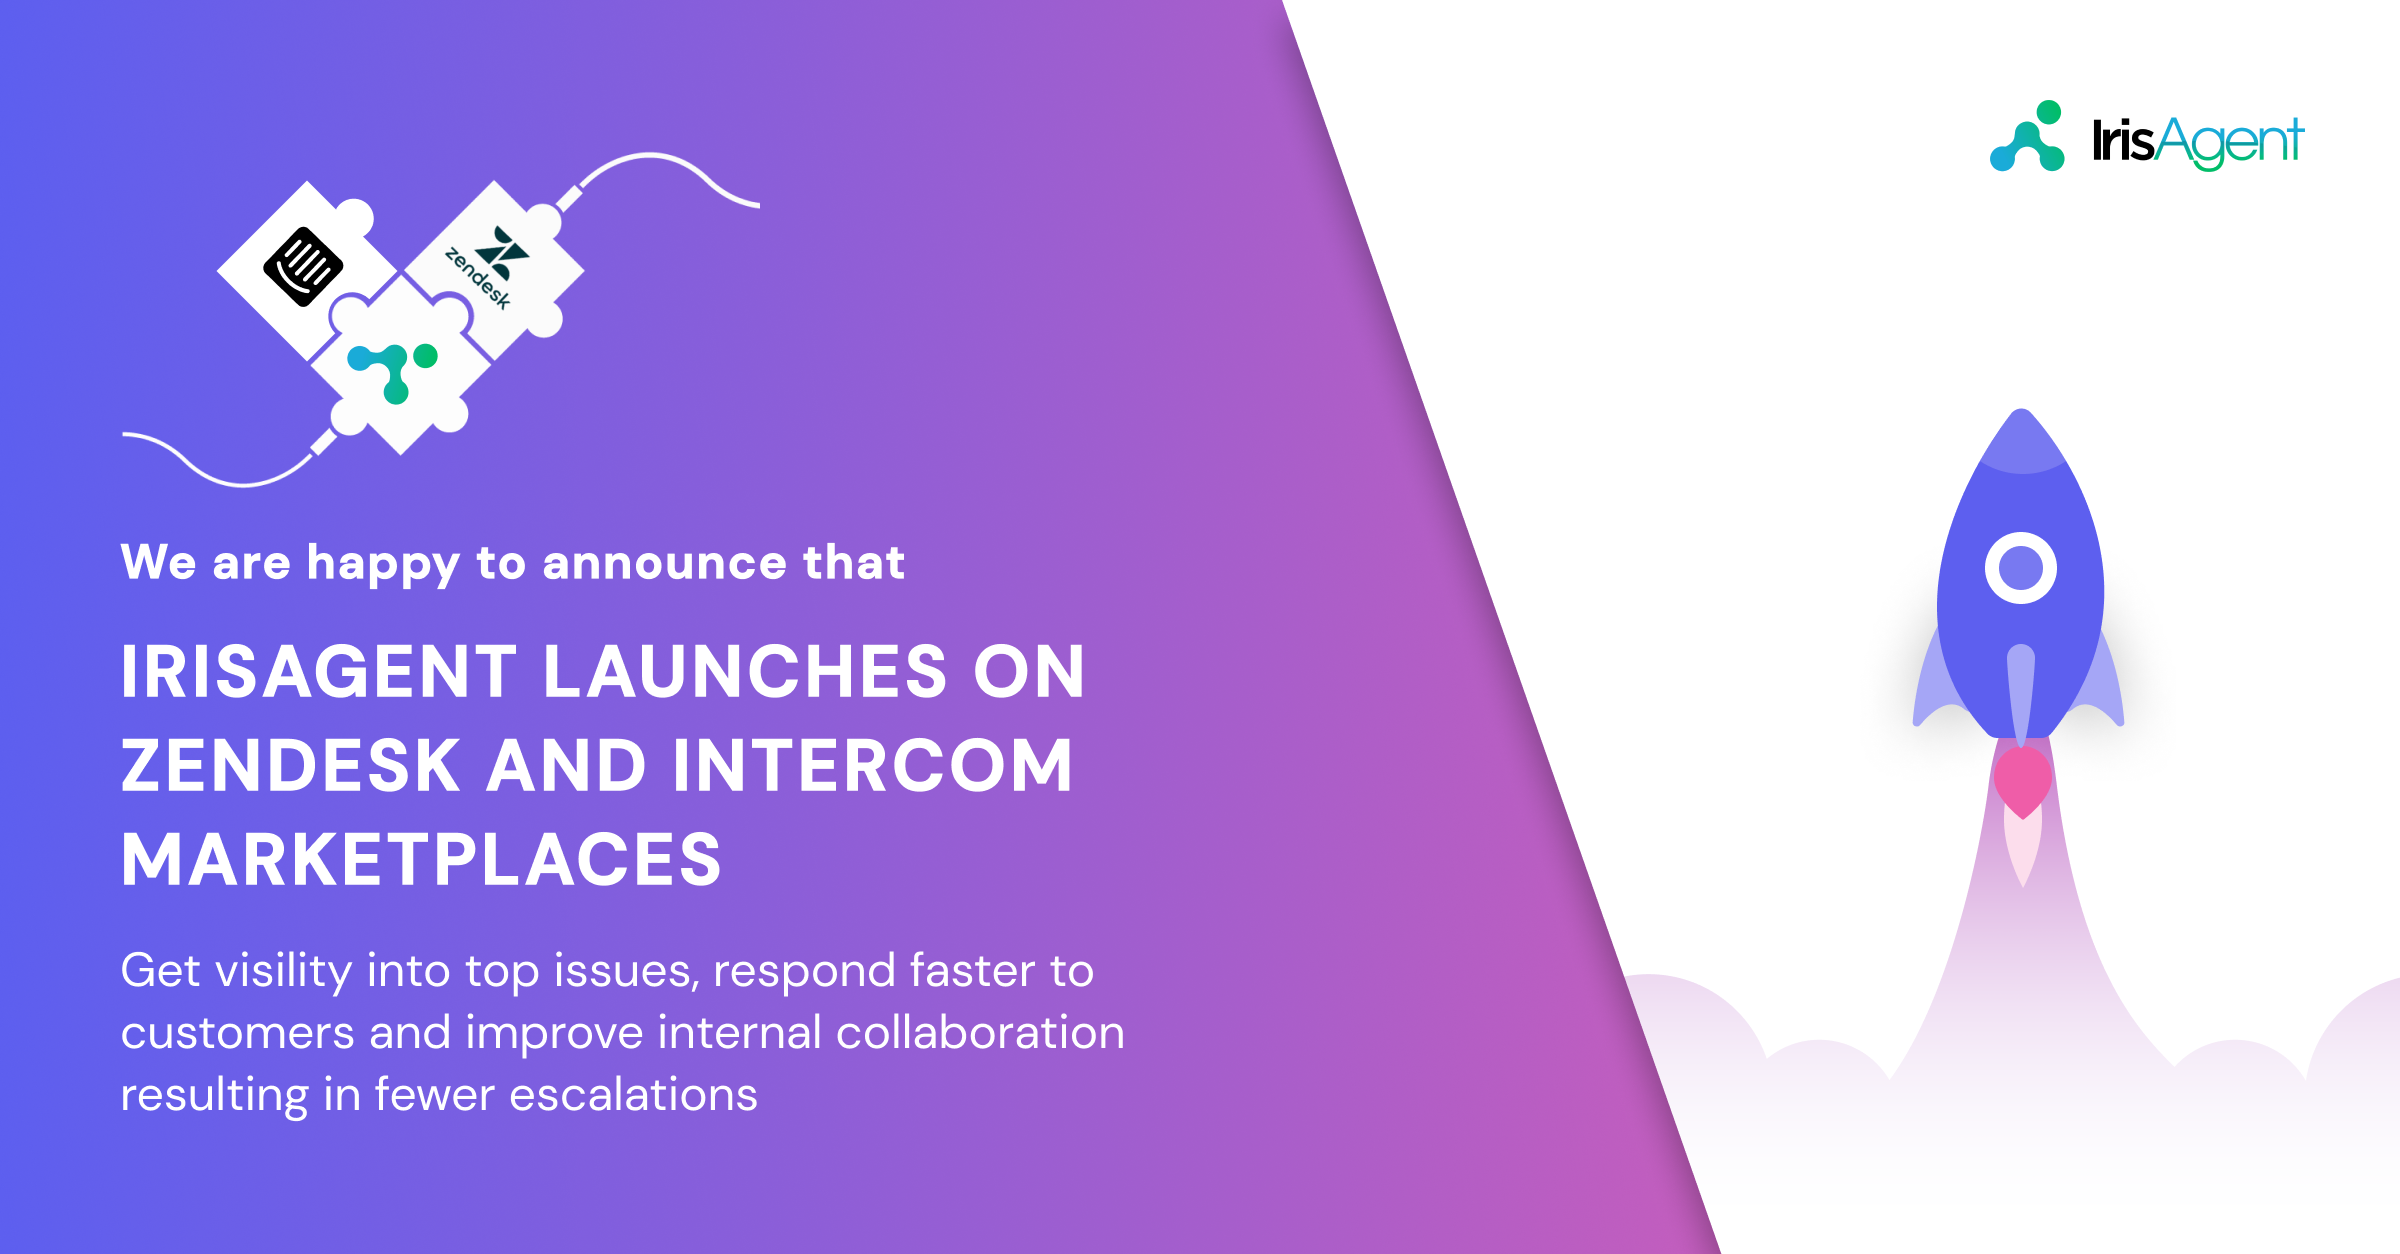 IrisAgent launches on Zendesk and Intercom marketplaces